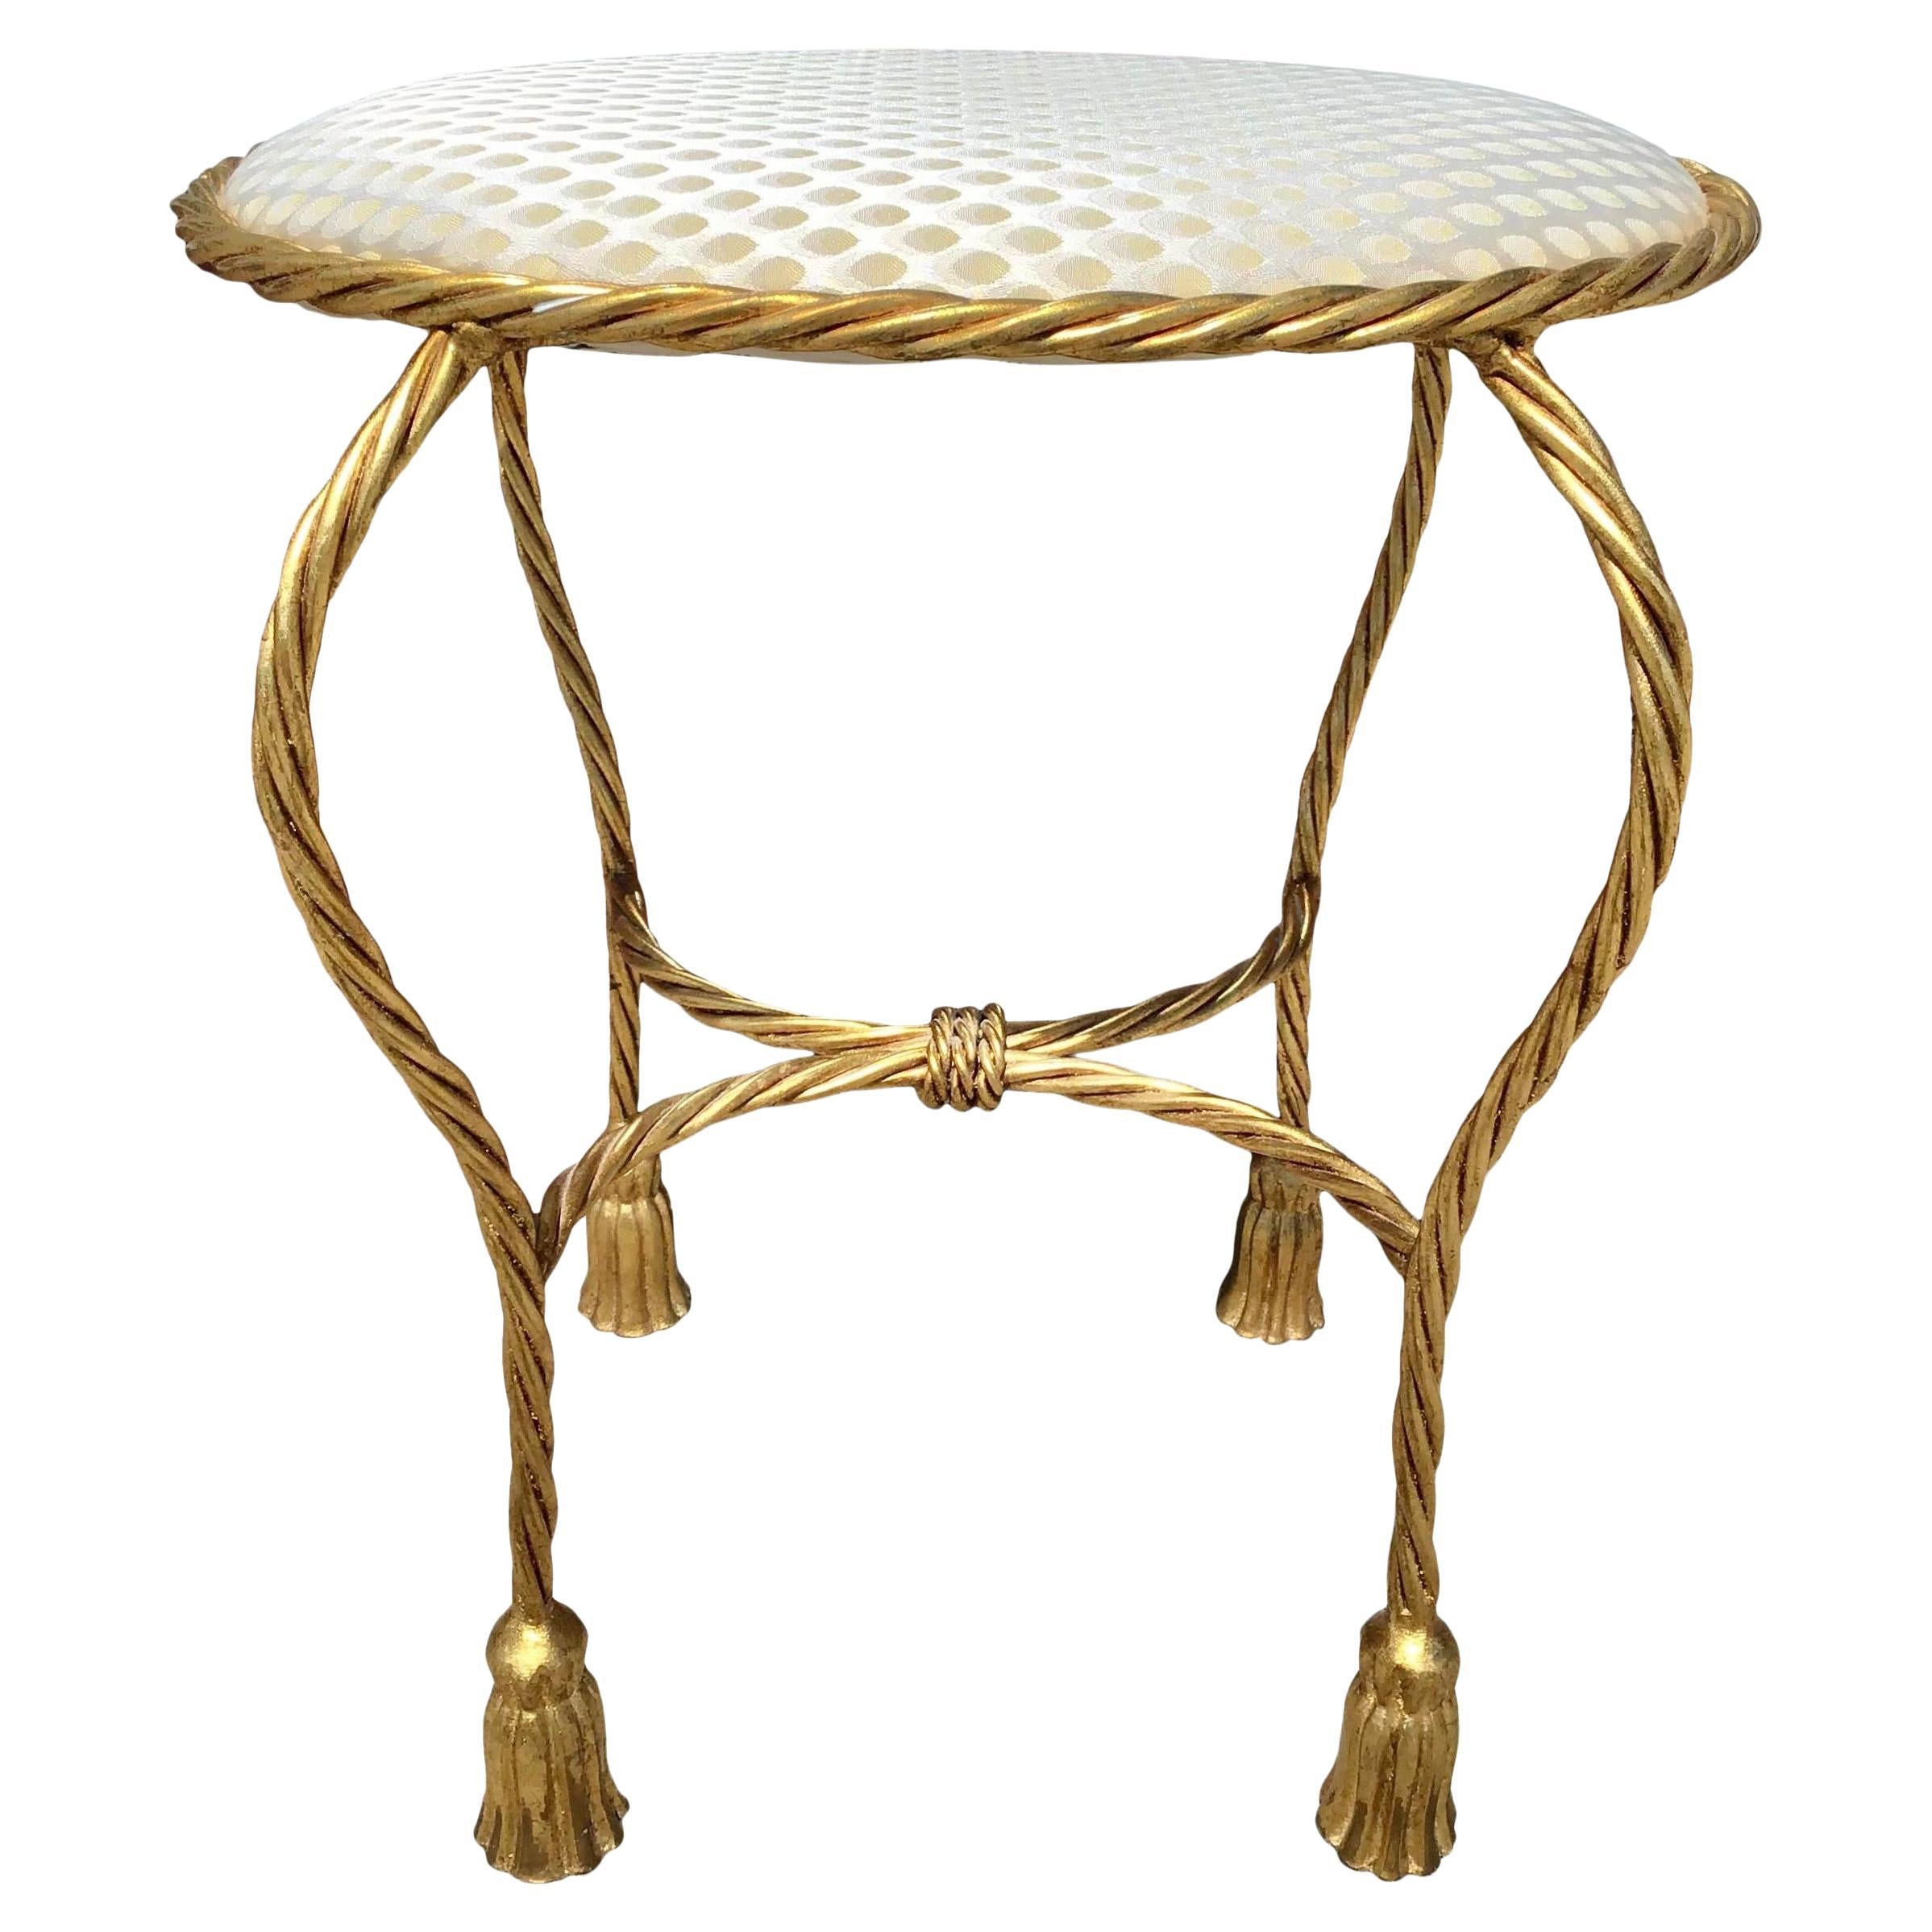 Oval Bench With Tassel Motif in Gold For Sale